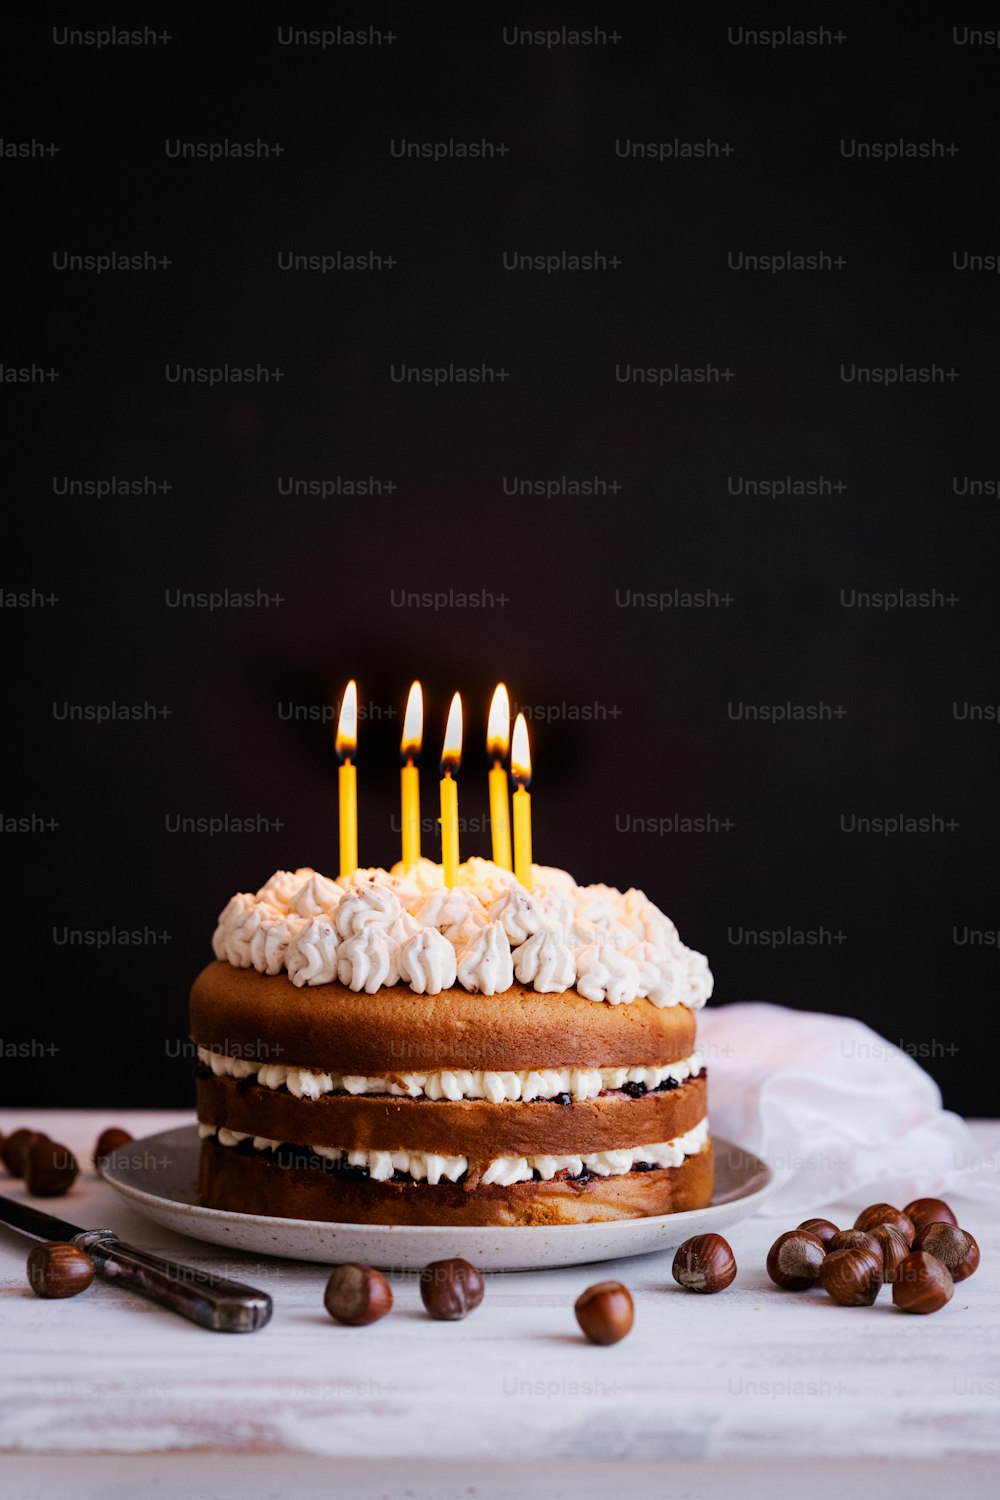 Happy Birthday Cake Pictures | Download Free Images On Unsplash